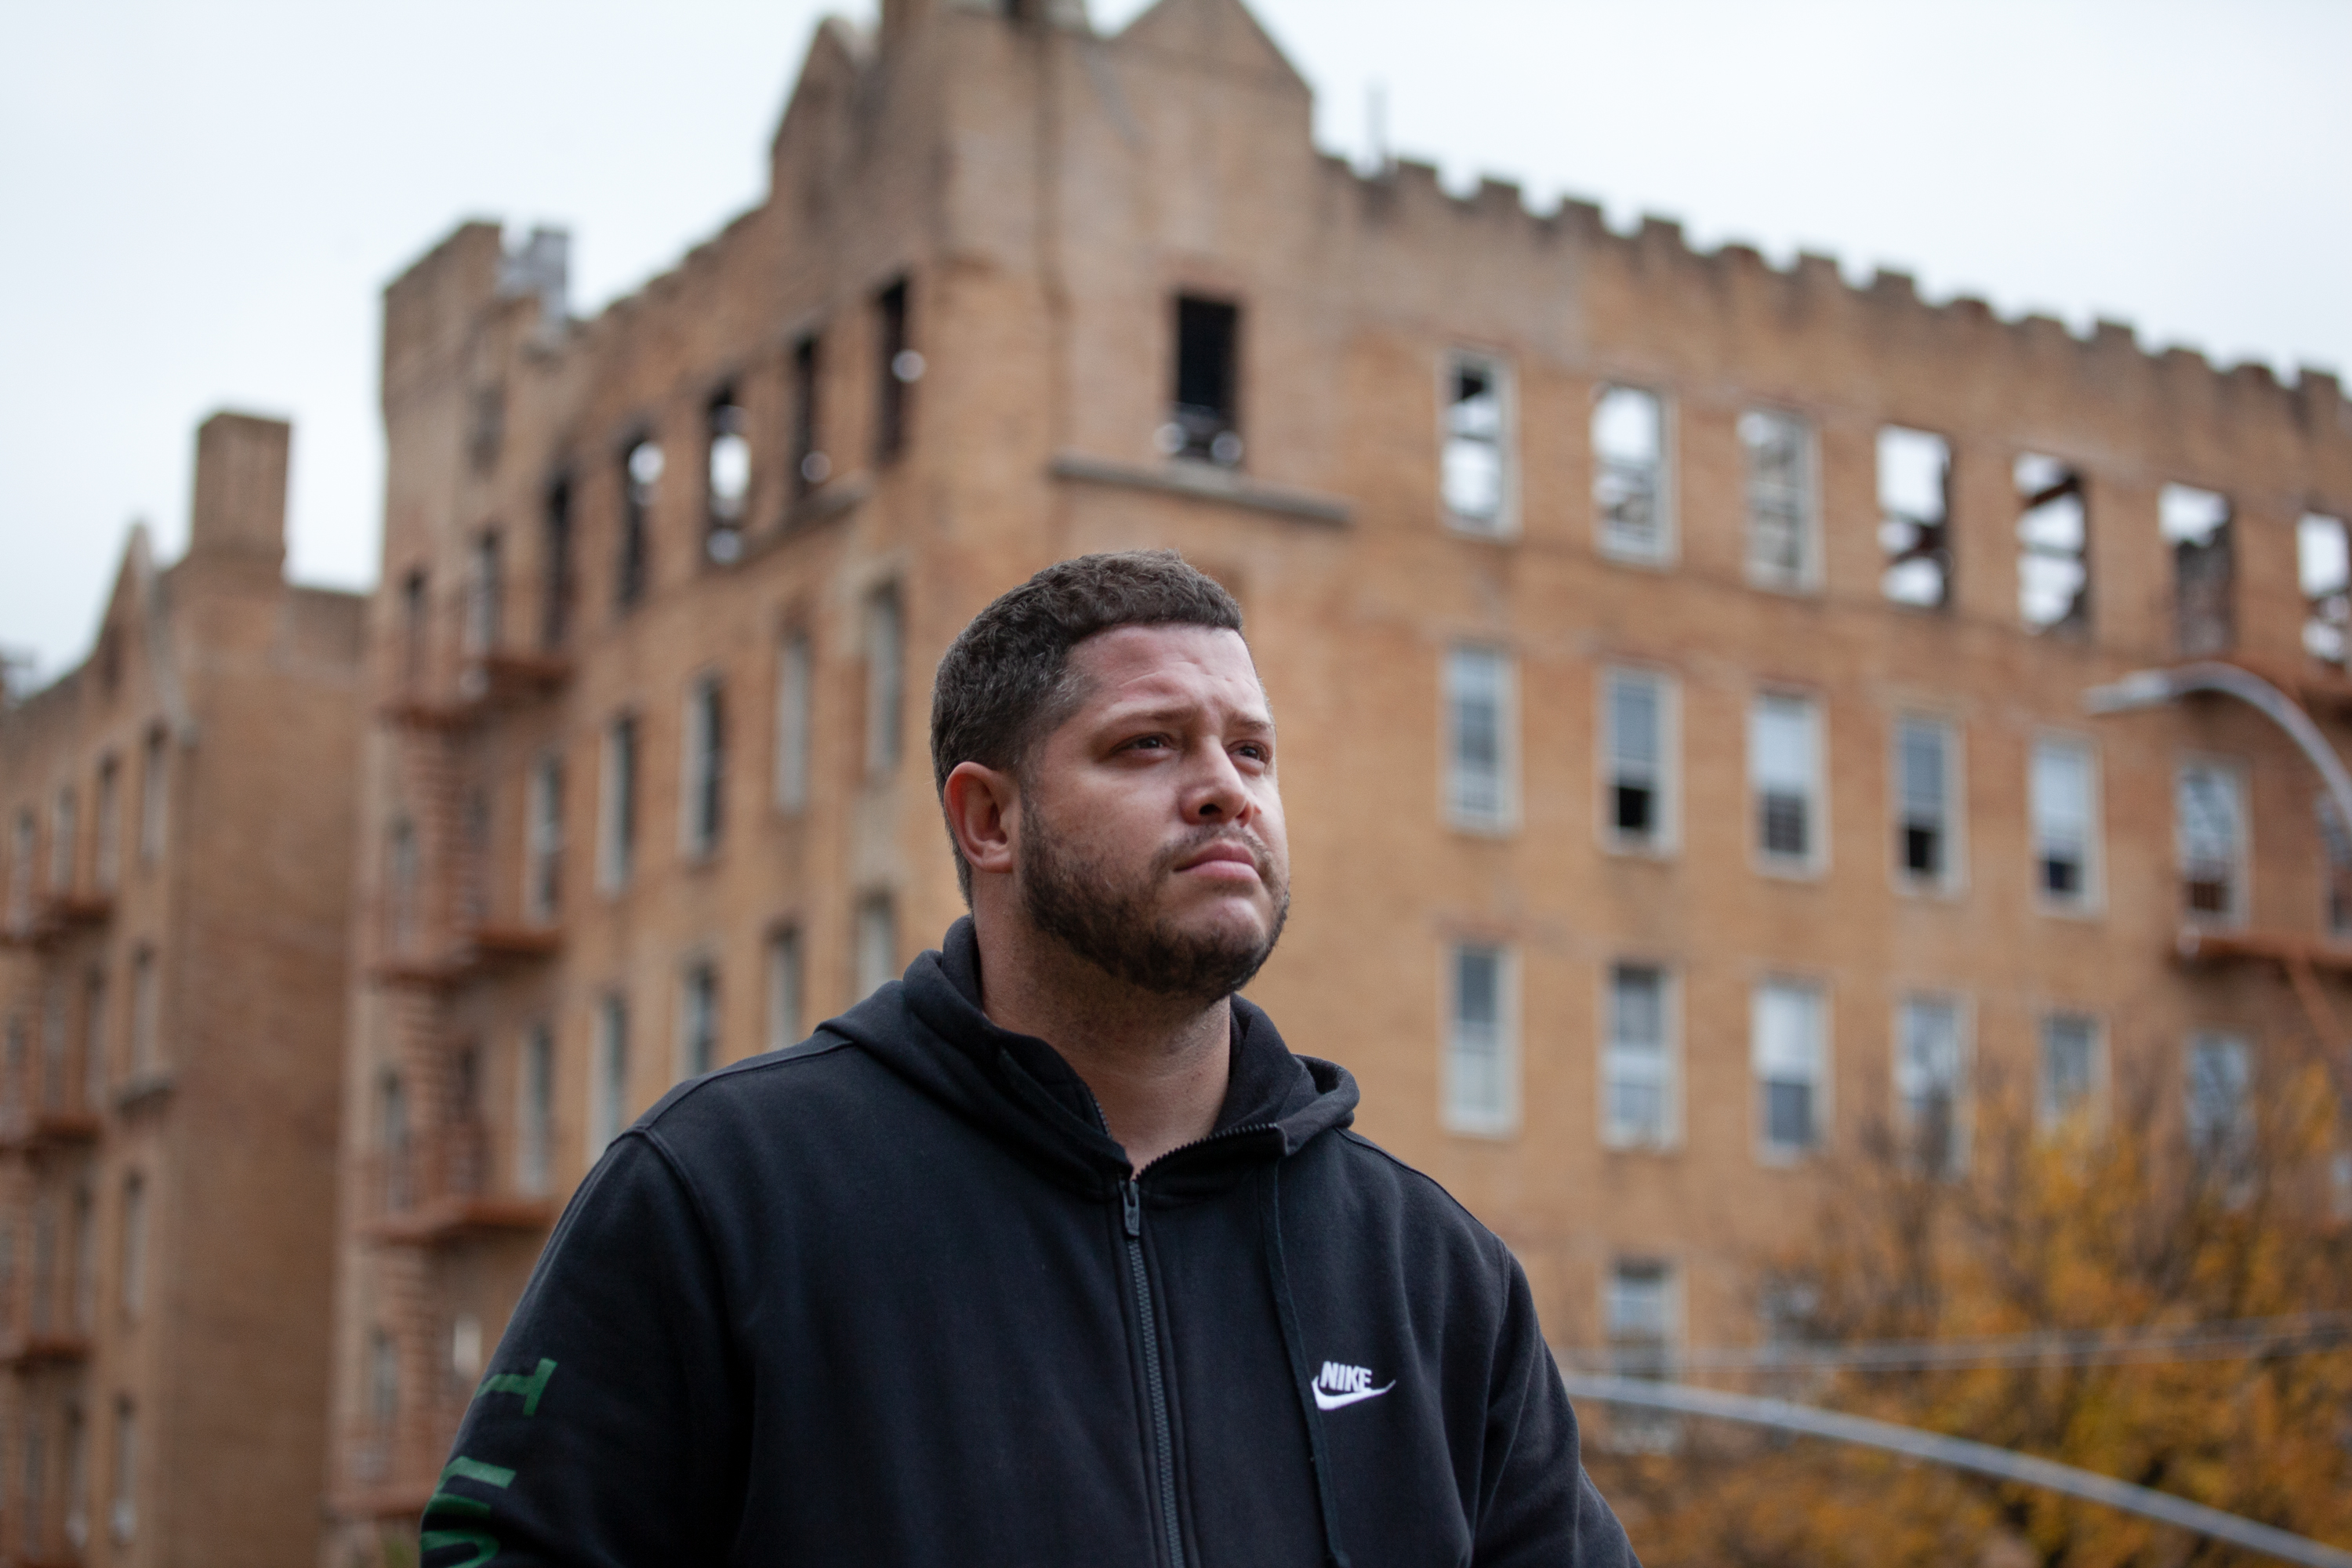 David Marrero struggled to find a home for ailing mother after they were forced out of their Sunset Park home when their building was destroyed in a fire.